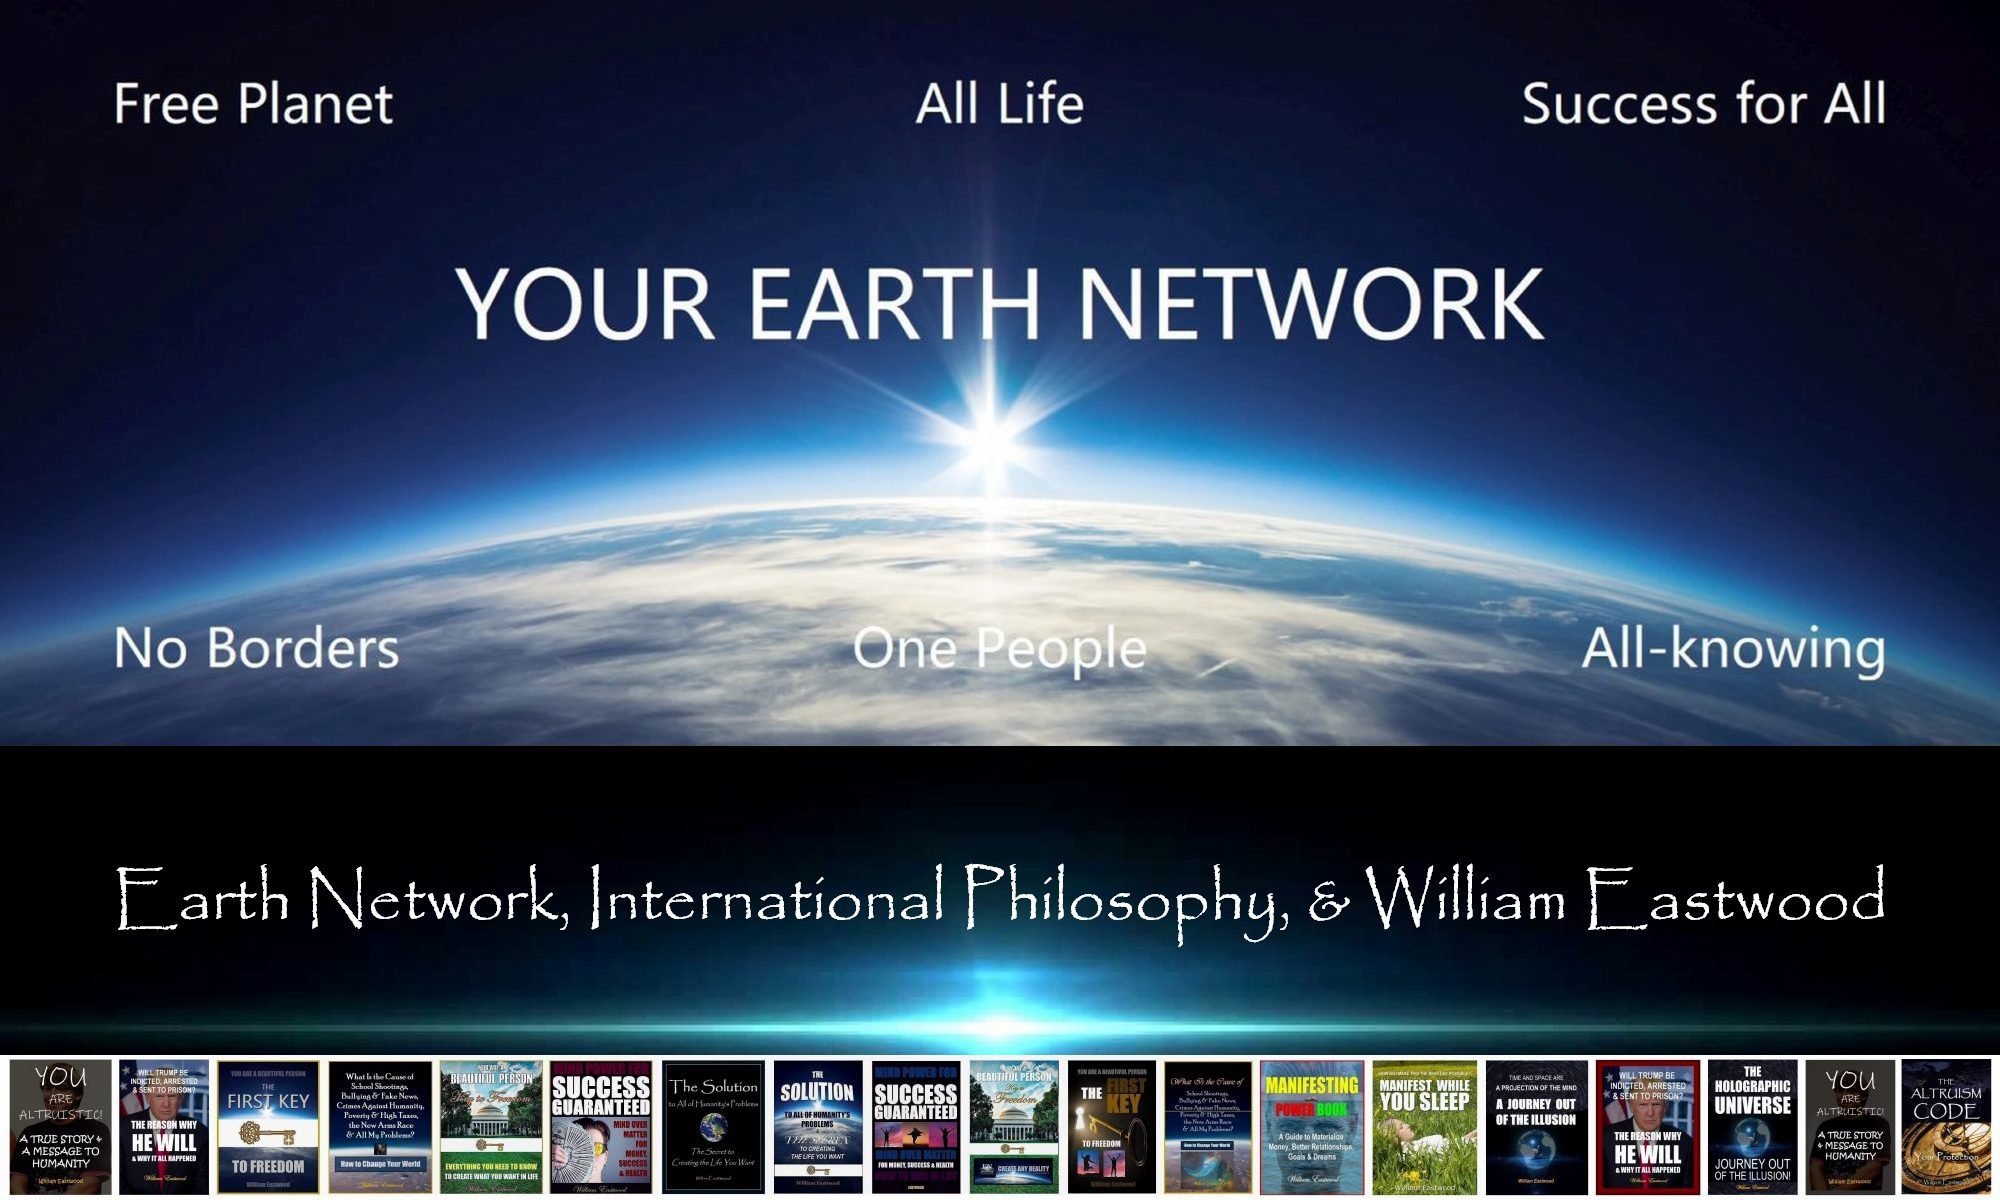 About us International Philosophy Earth Network founded by William Eastwood